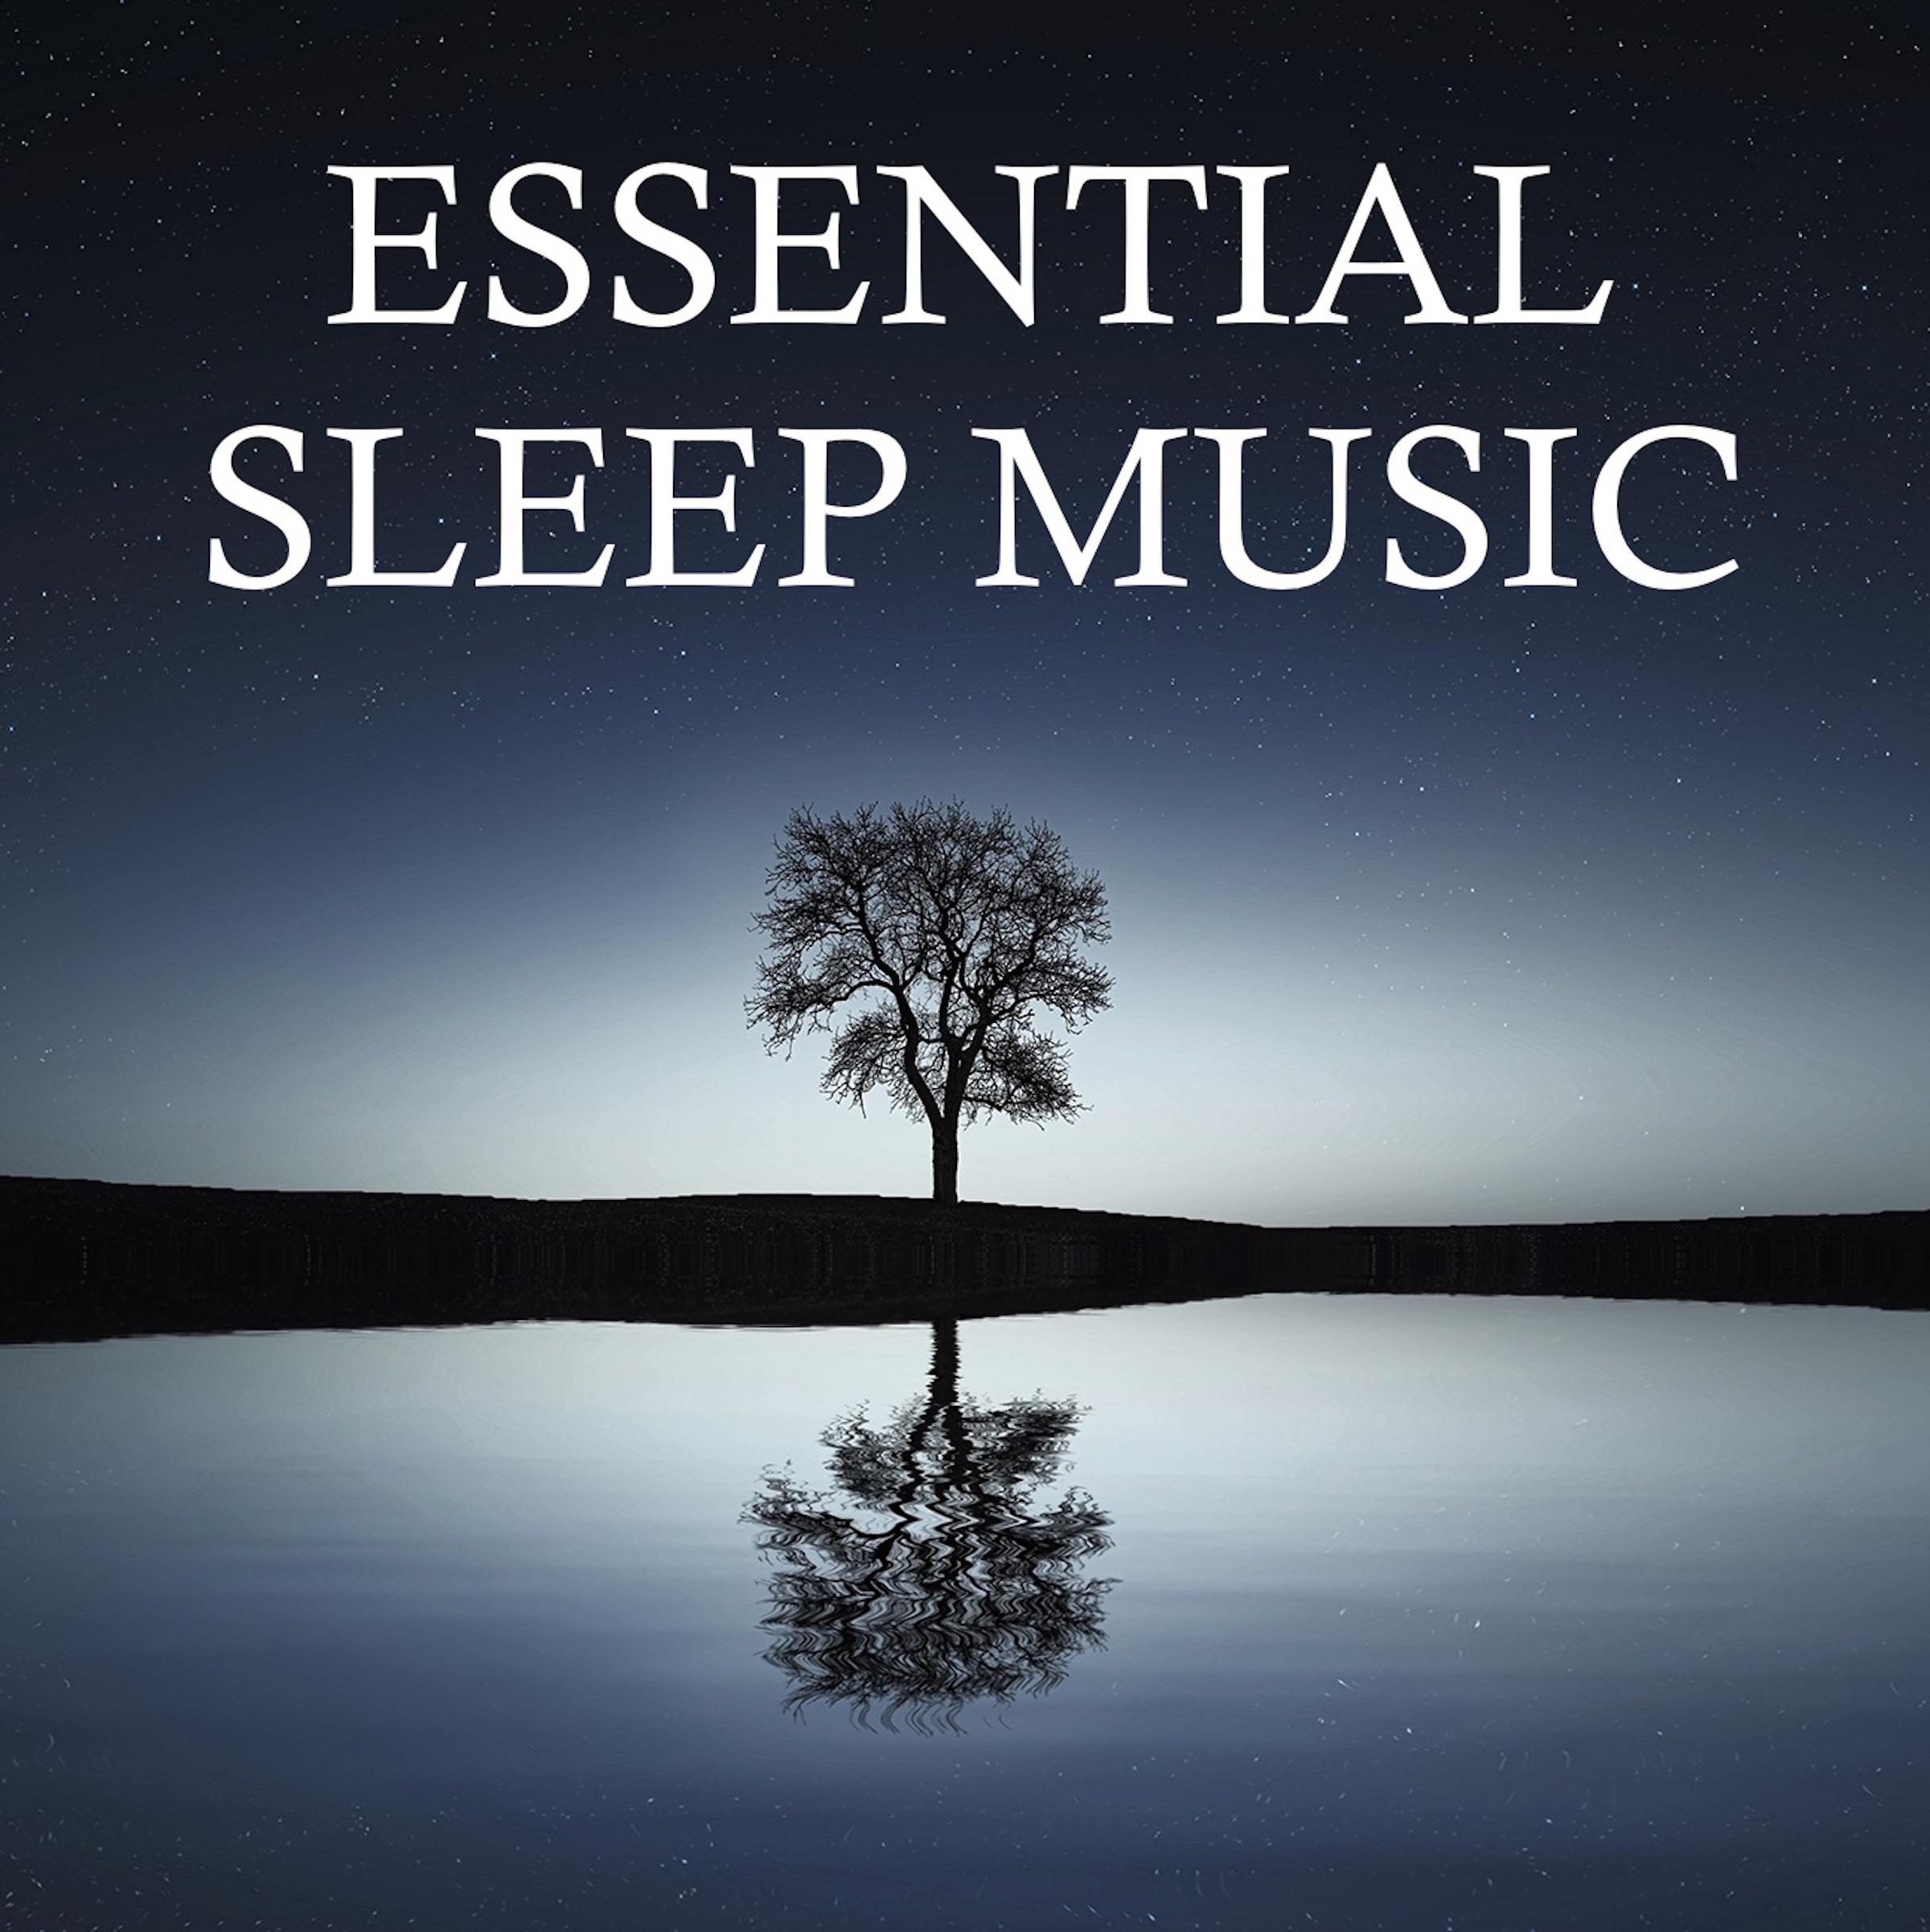 Essential Sleep Music - Soothing Melodies for Deep Sleep, Meditation, Total Relaxation and Healthy Living Through Better Sleep and Less Stress & Anxiety